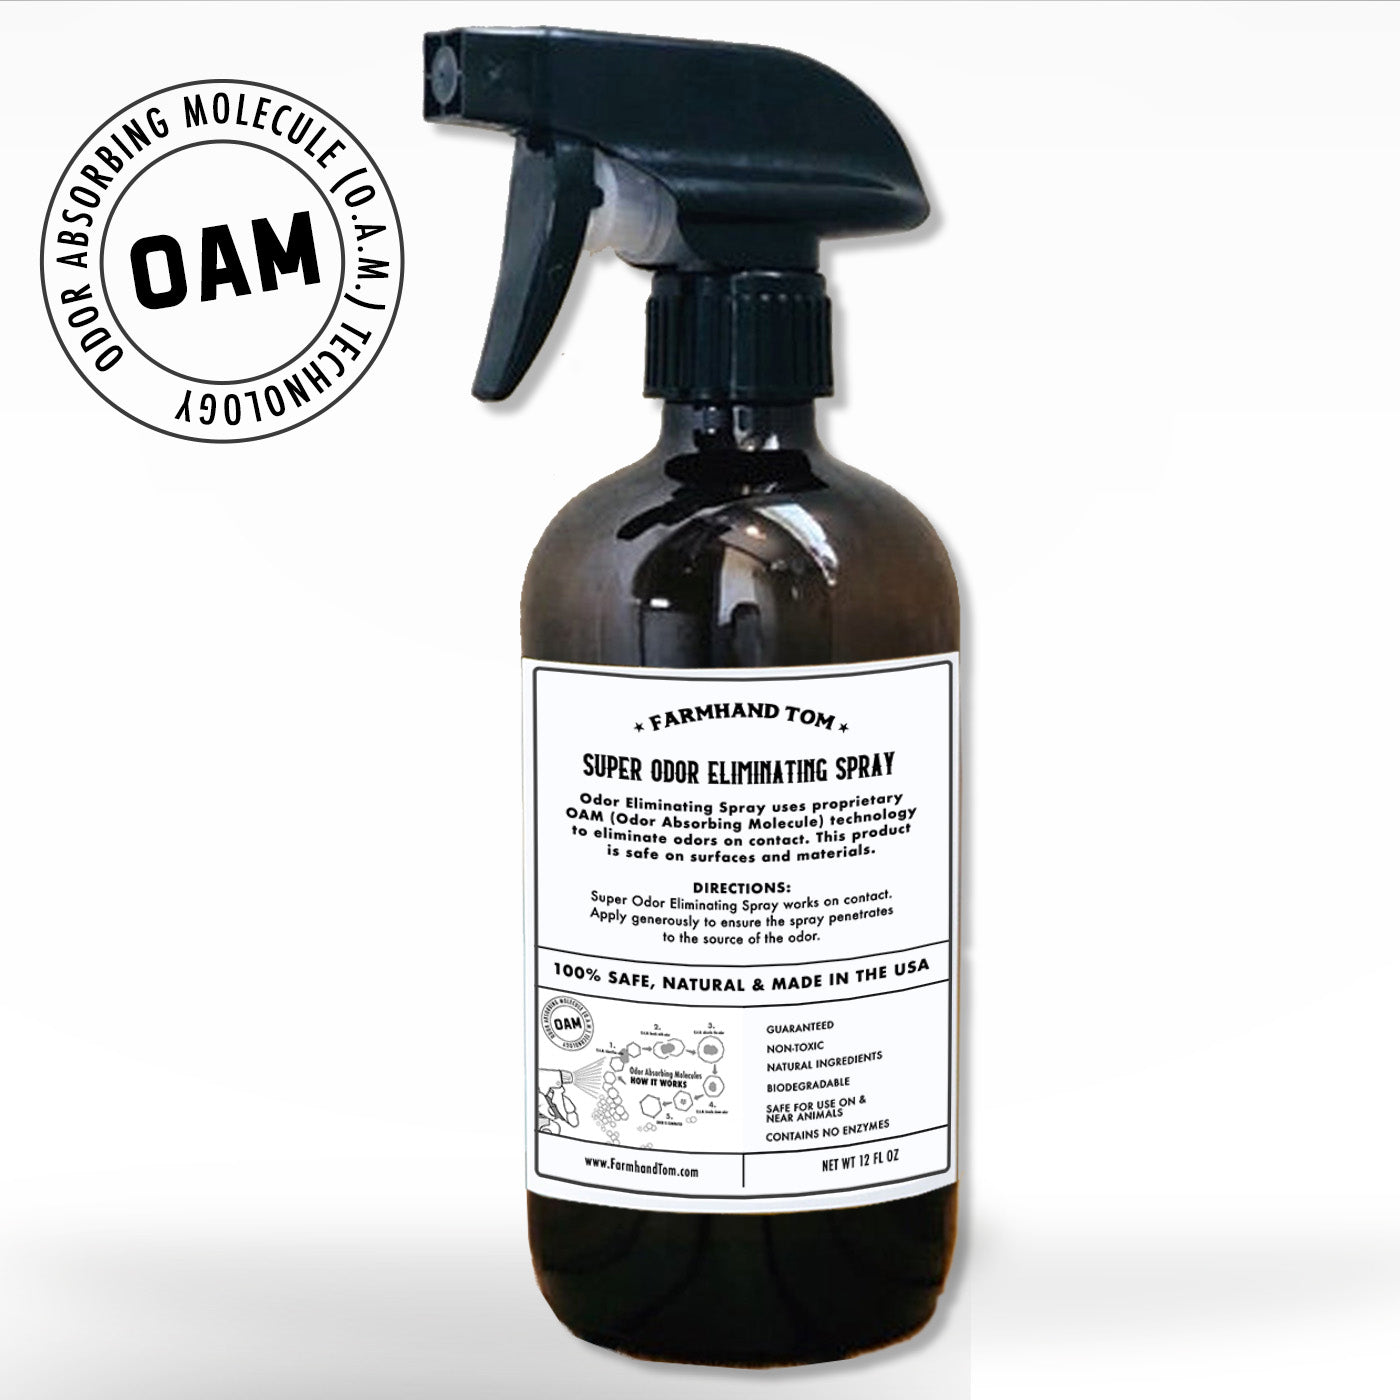 ROTTING FOOD | Super Odor Eliminating Spray for Cars, Coolers & Freezers